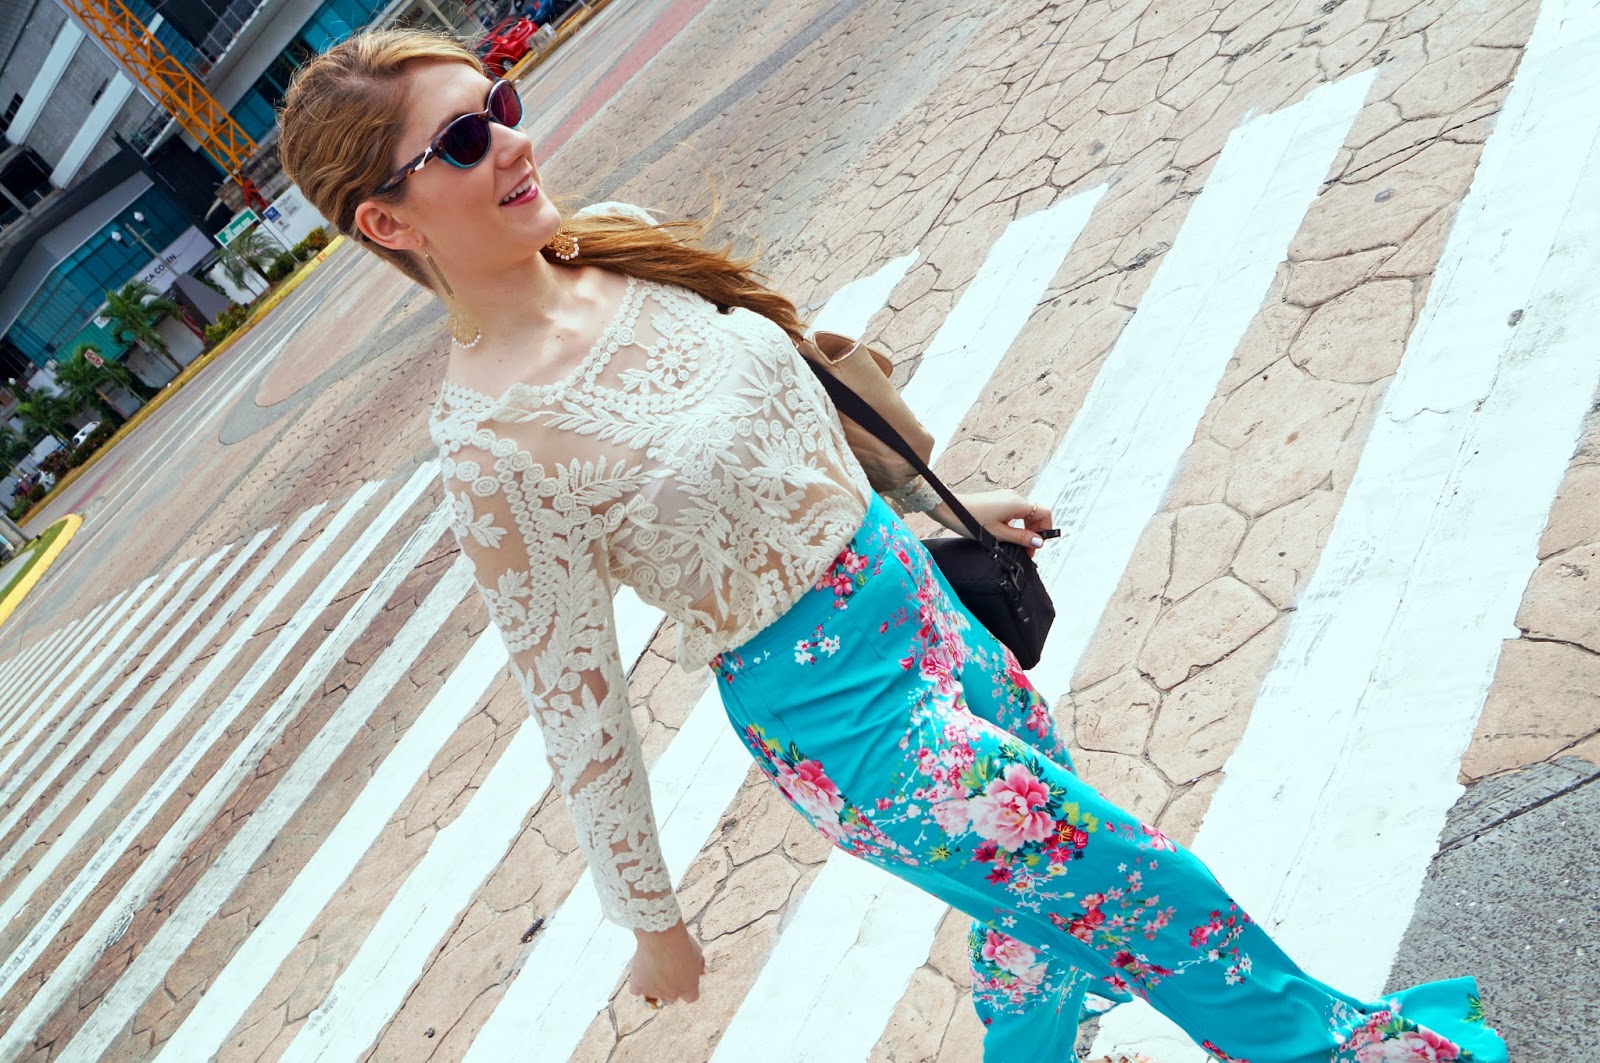 Sheinside Top, Forever21 Palazzo Pants